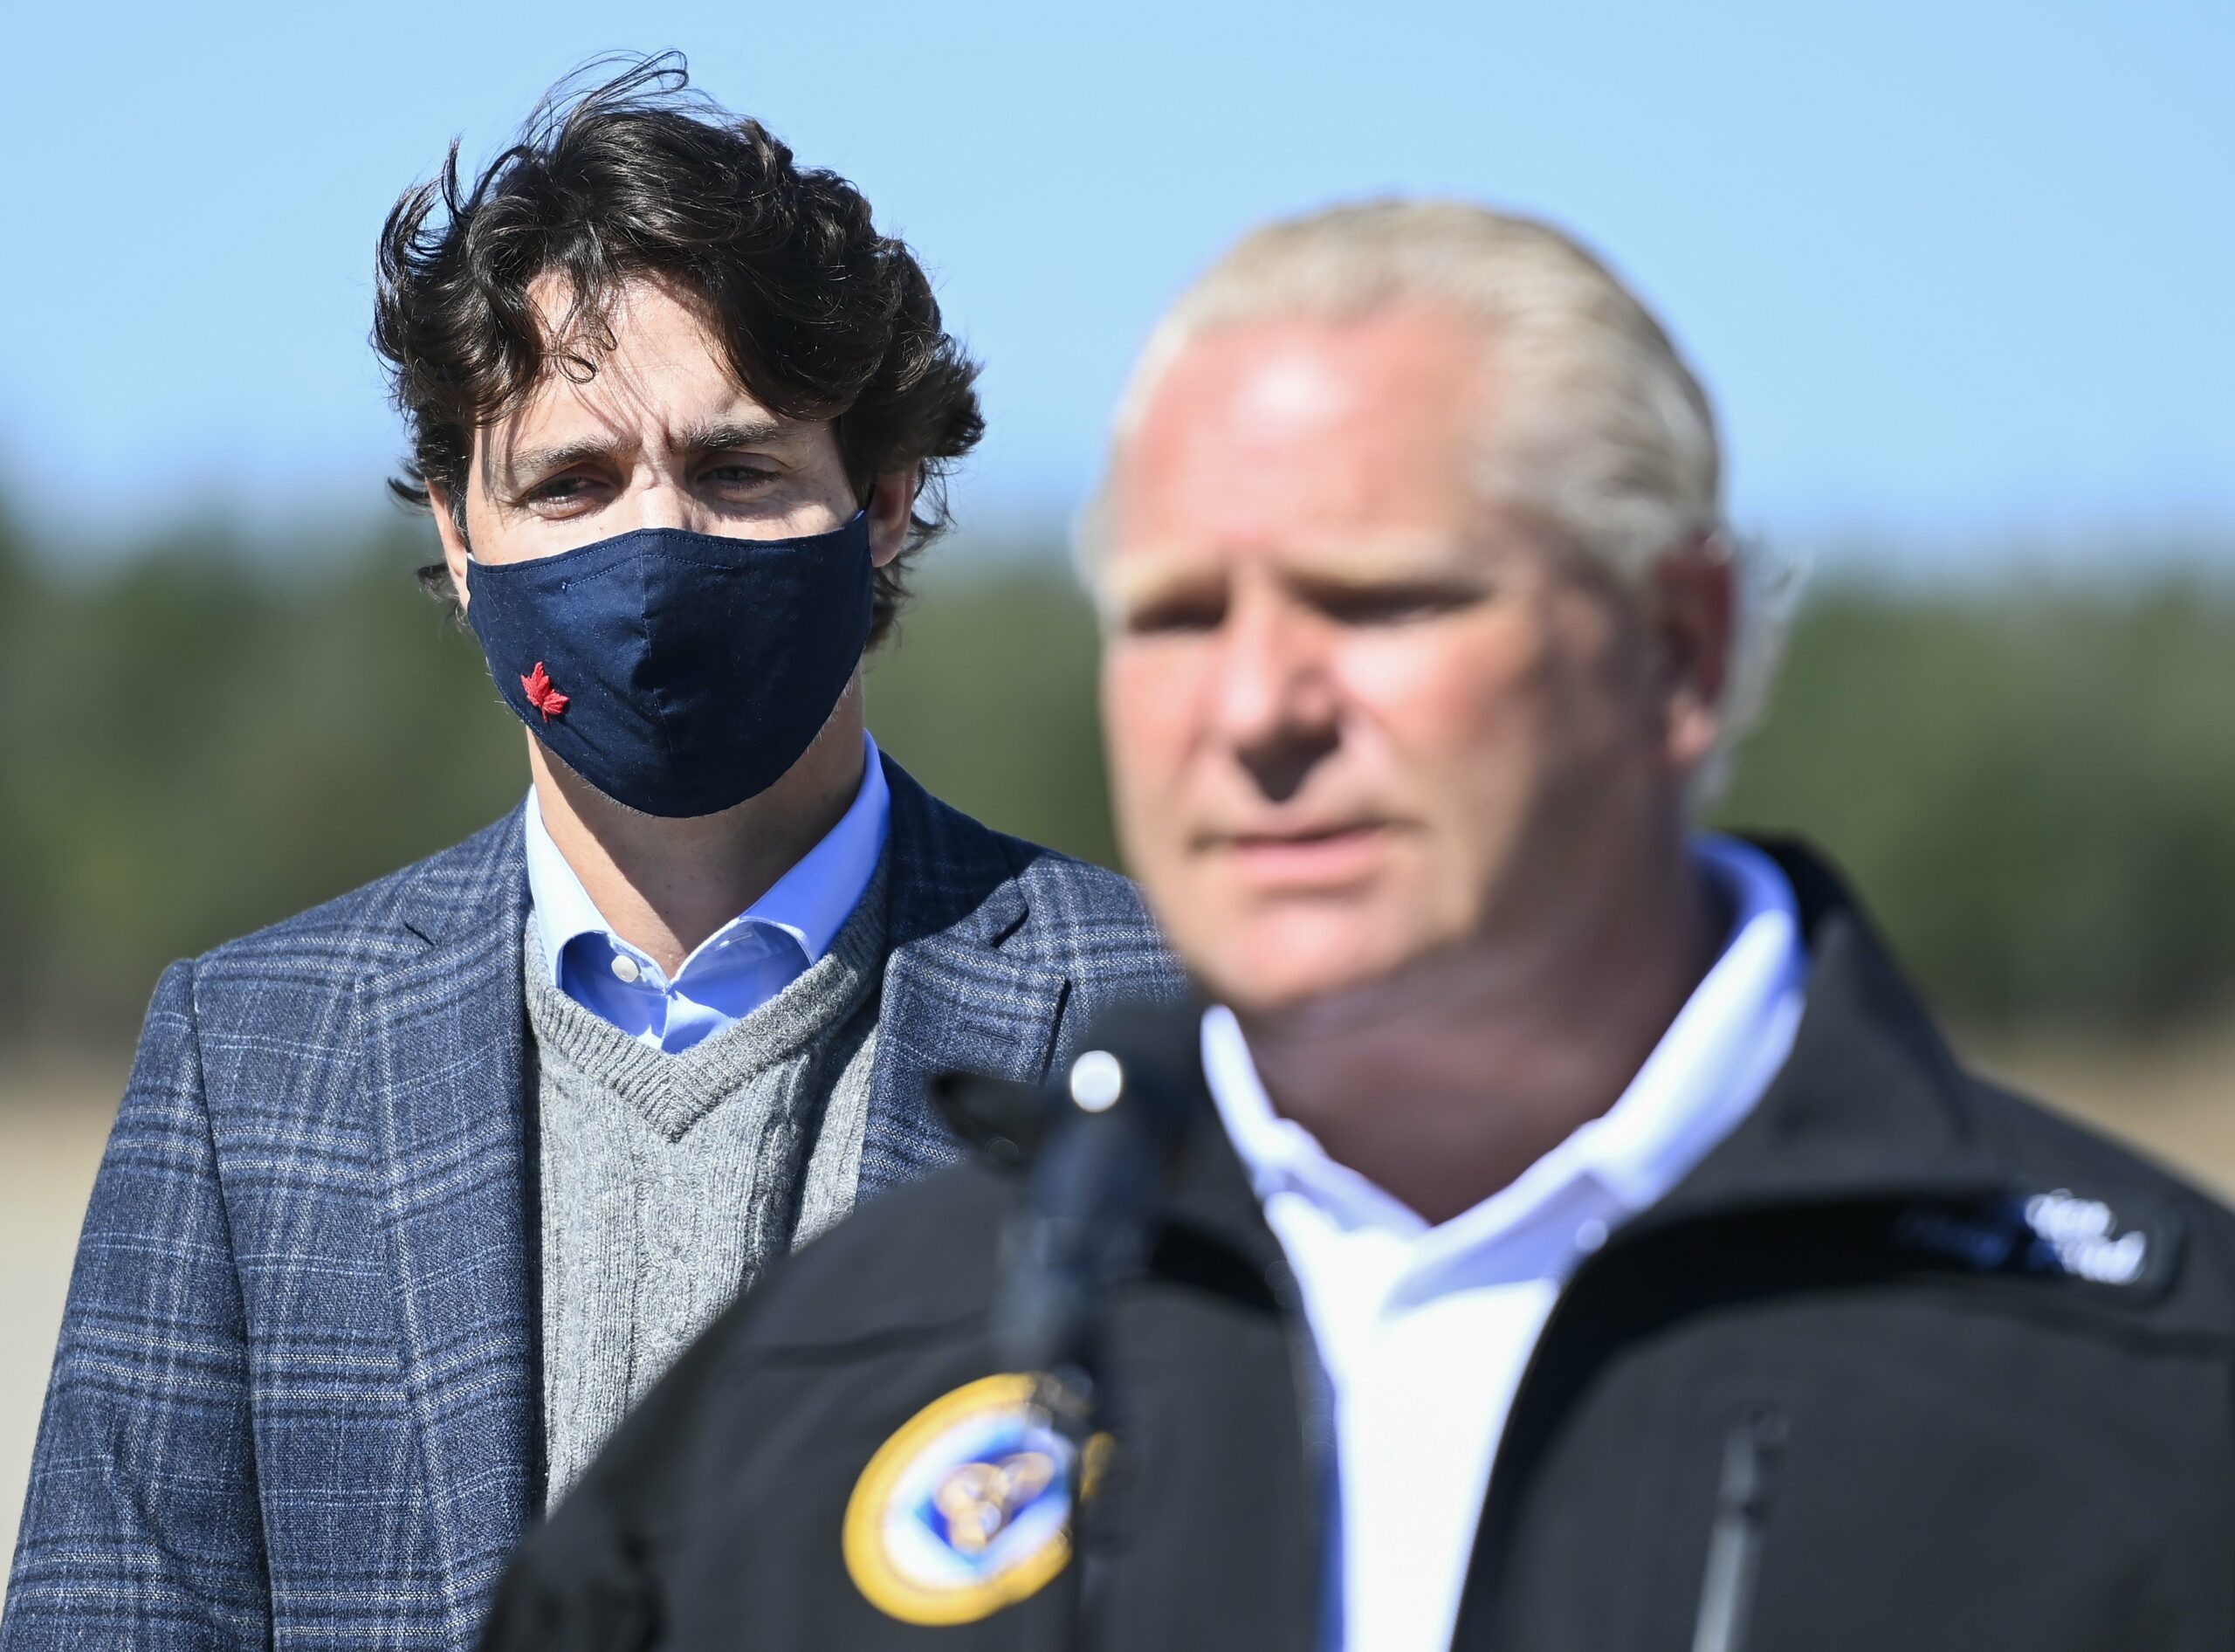 Trudeau blasted Ford for 'hiding from his responsibility' to deal with Ottawa convoy